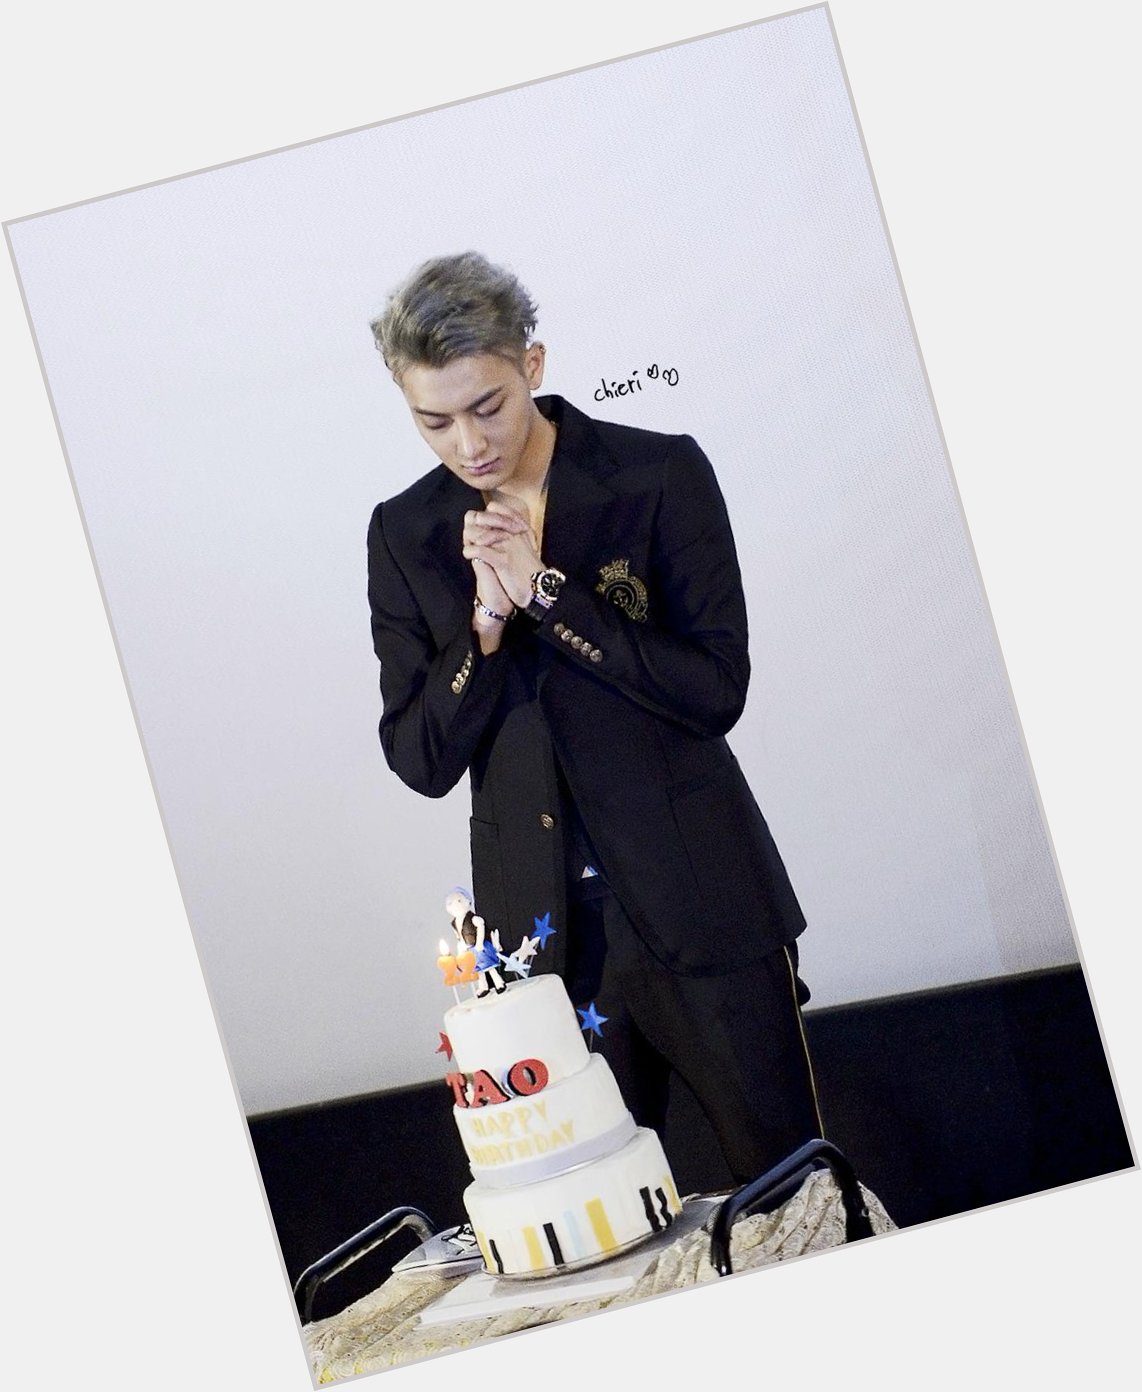 I WISH A VERY HAPPY BIRTHDAY. MAY GOD WILL ALWAYS BLESS YOU FOREVER. I LOVE YOU HUANG ZITAO 